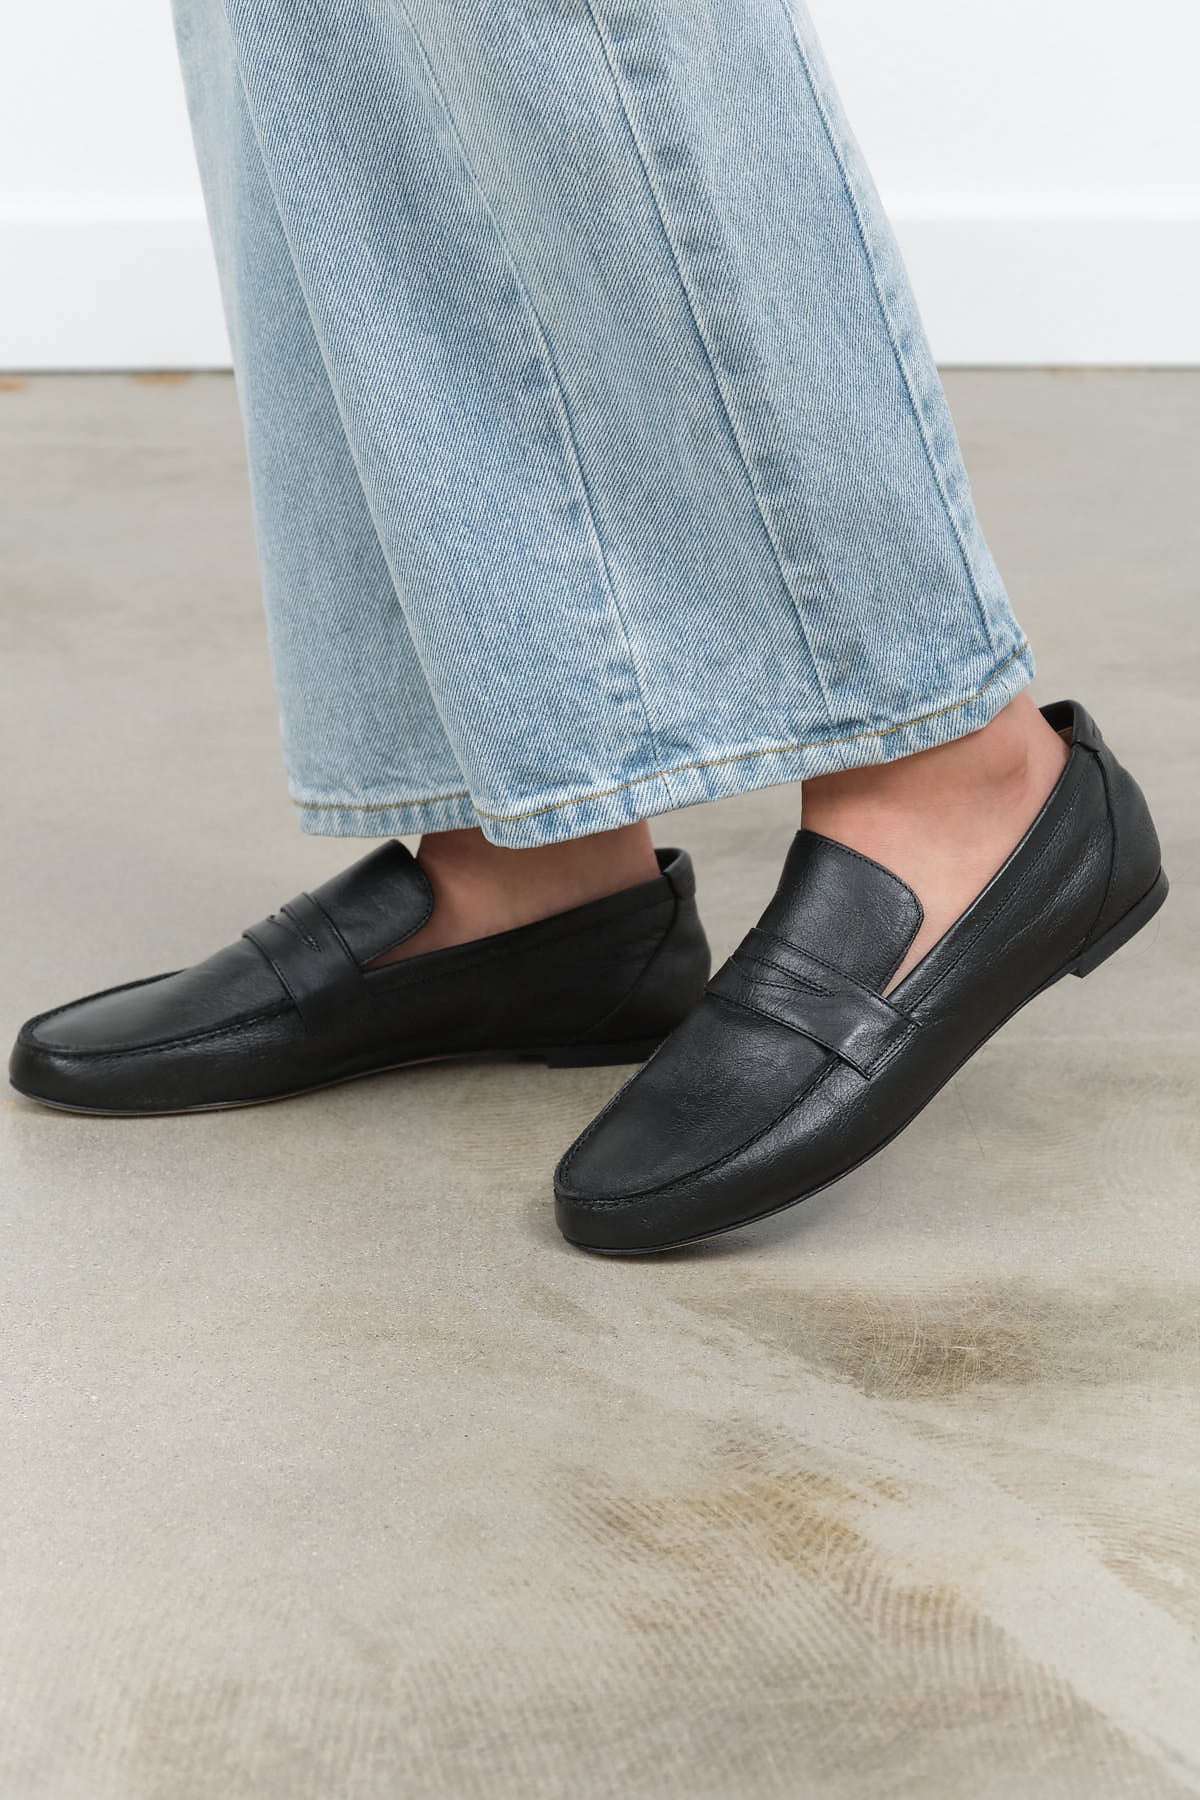 Lifted view of Penny Loafer in Black